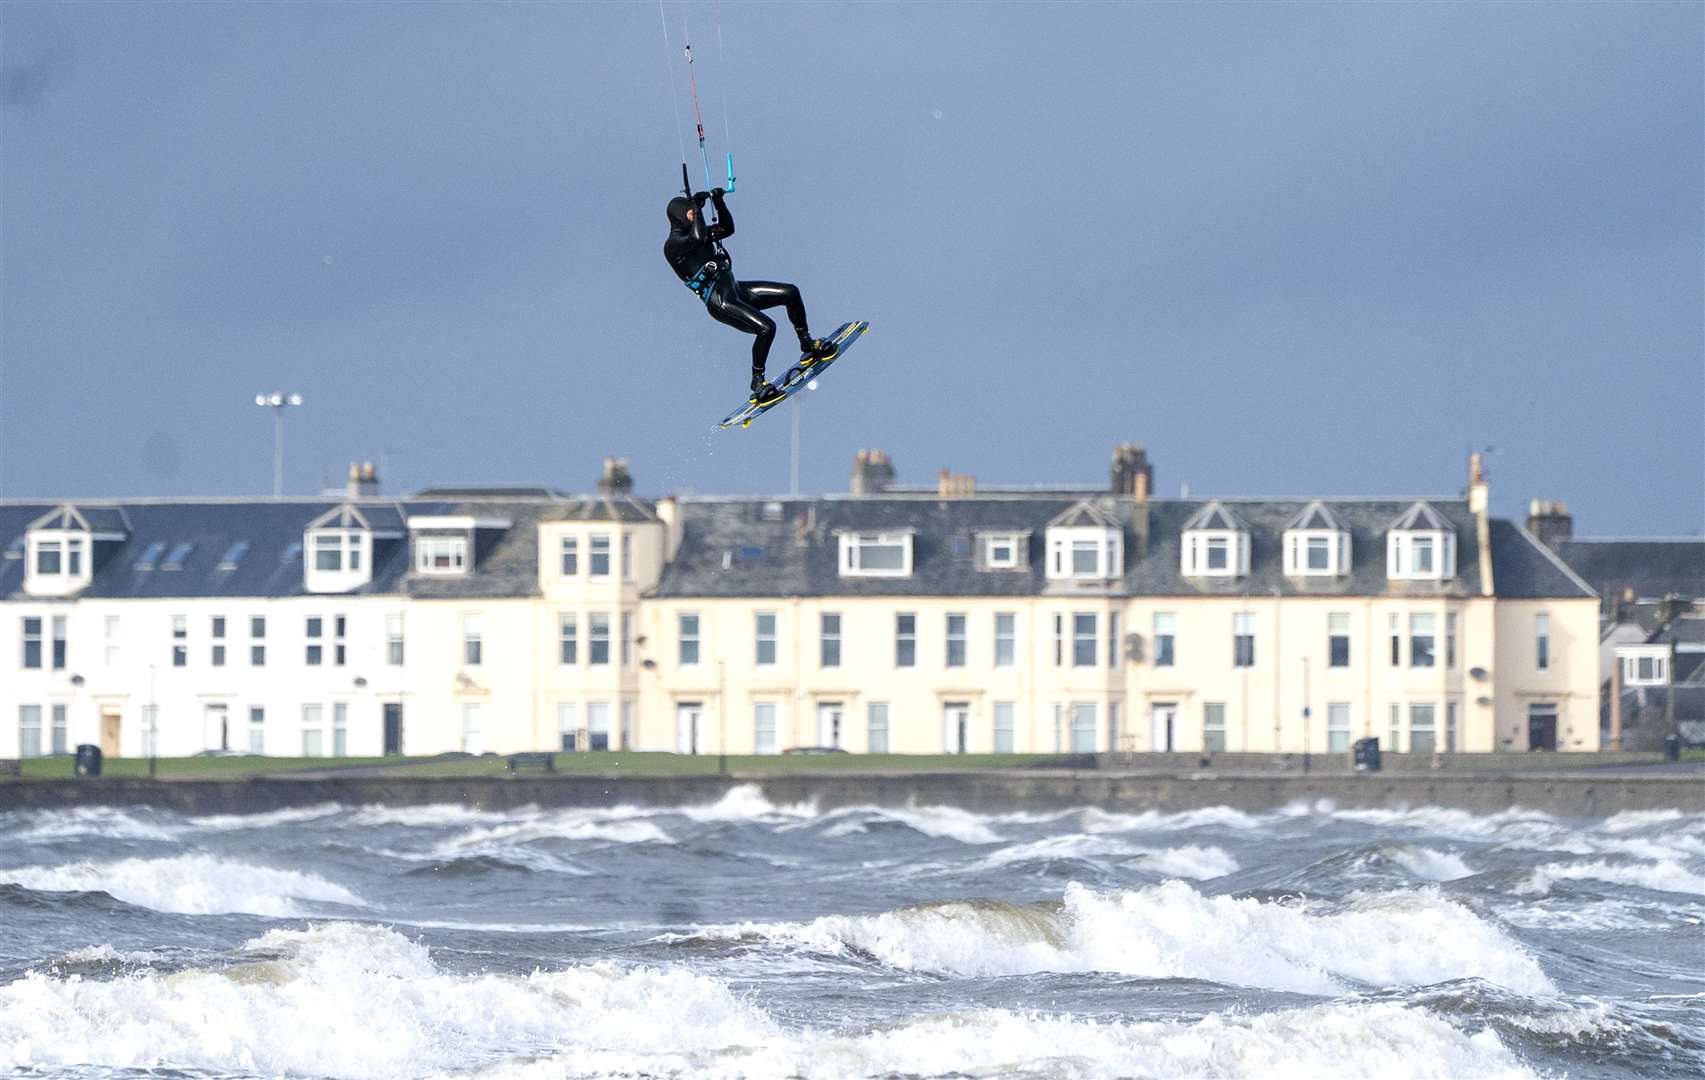 A kitesurfer soared above Troon during the Kitesurf Scotland Big Air event off the South Ayrshire coast in February (Jane Barlow/PA)